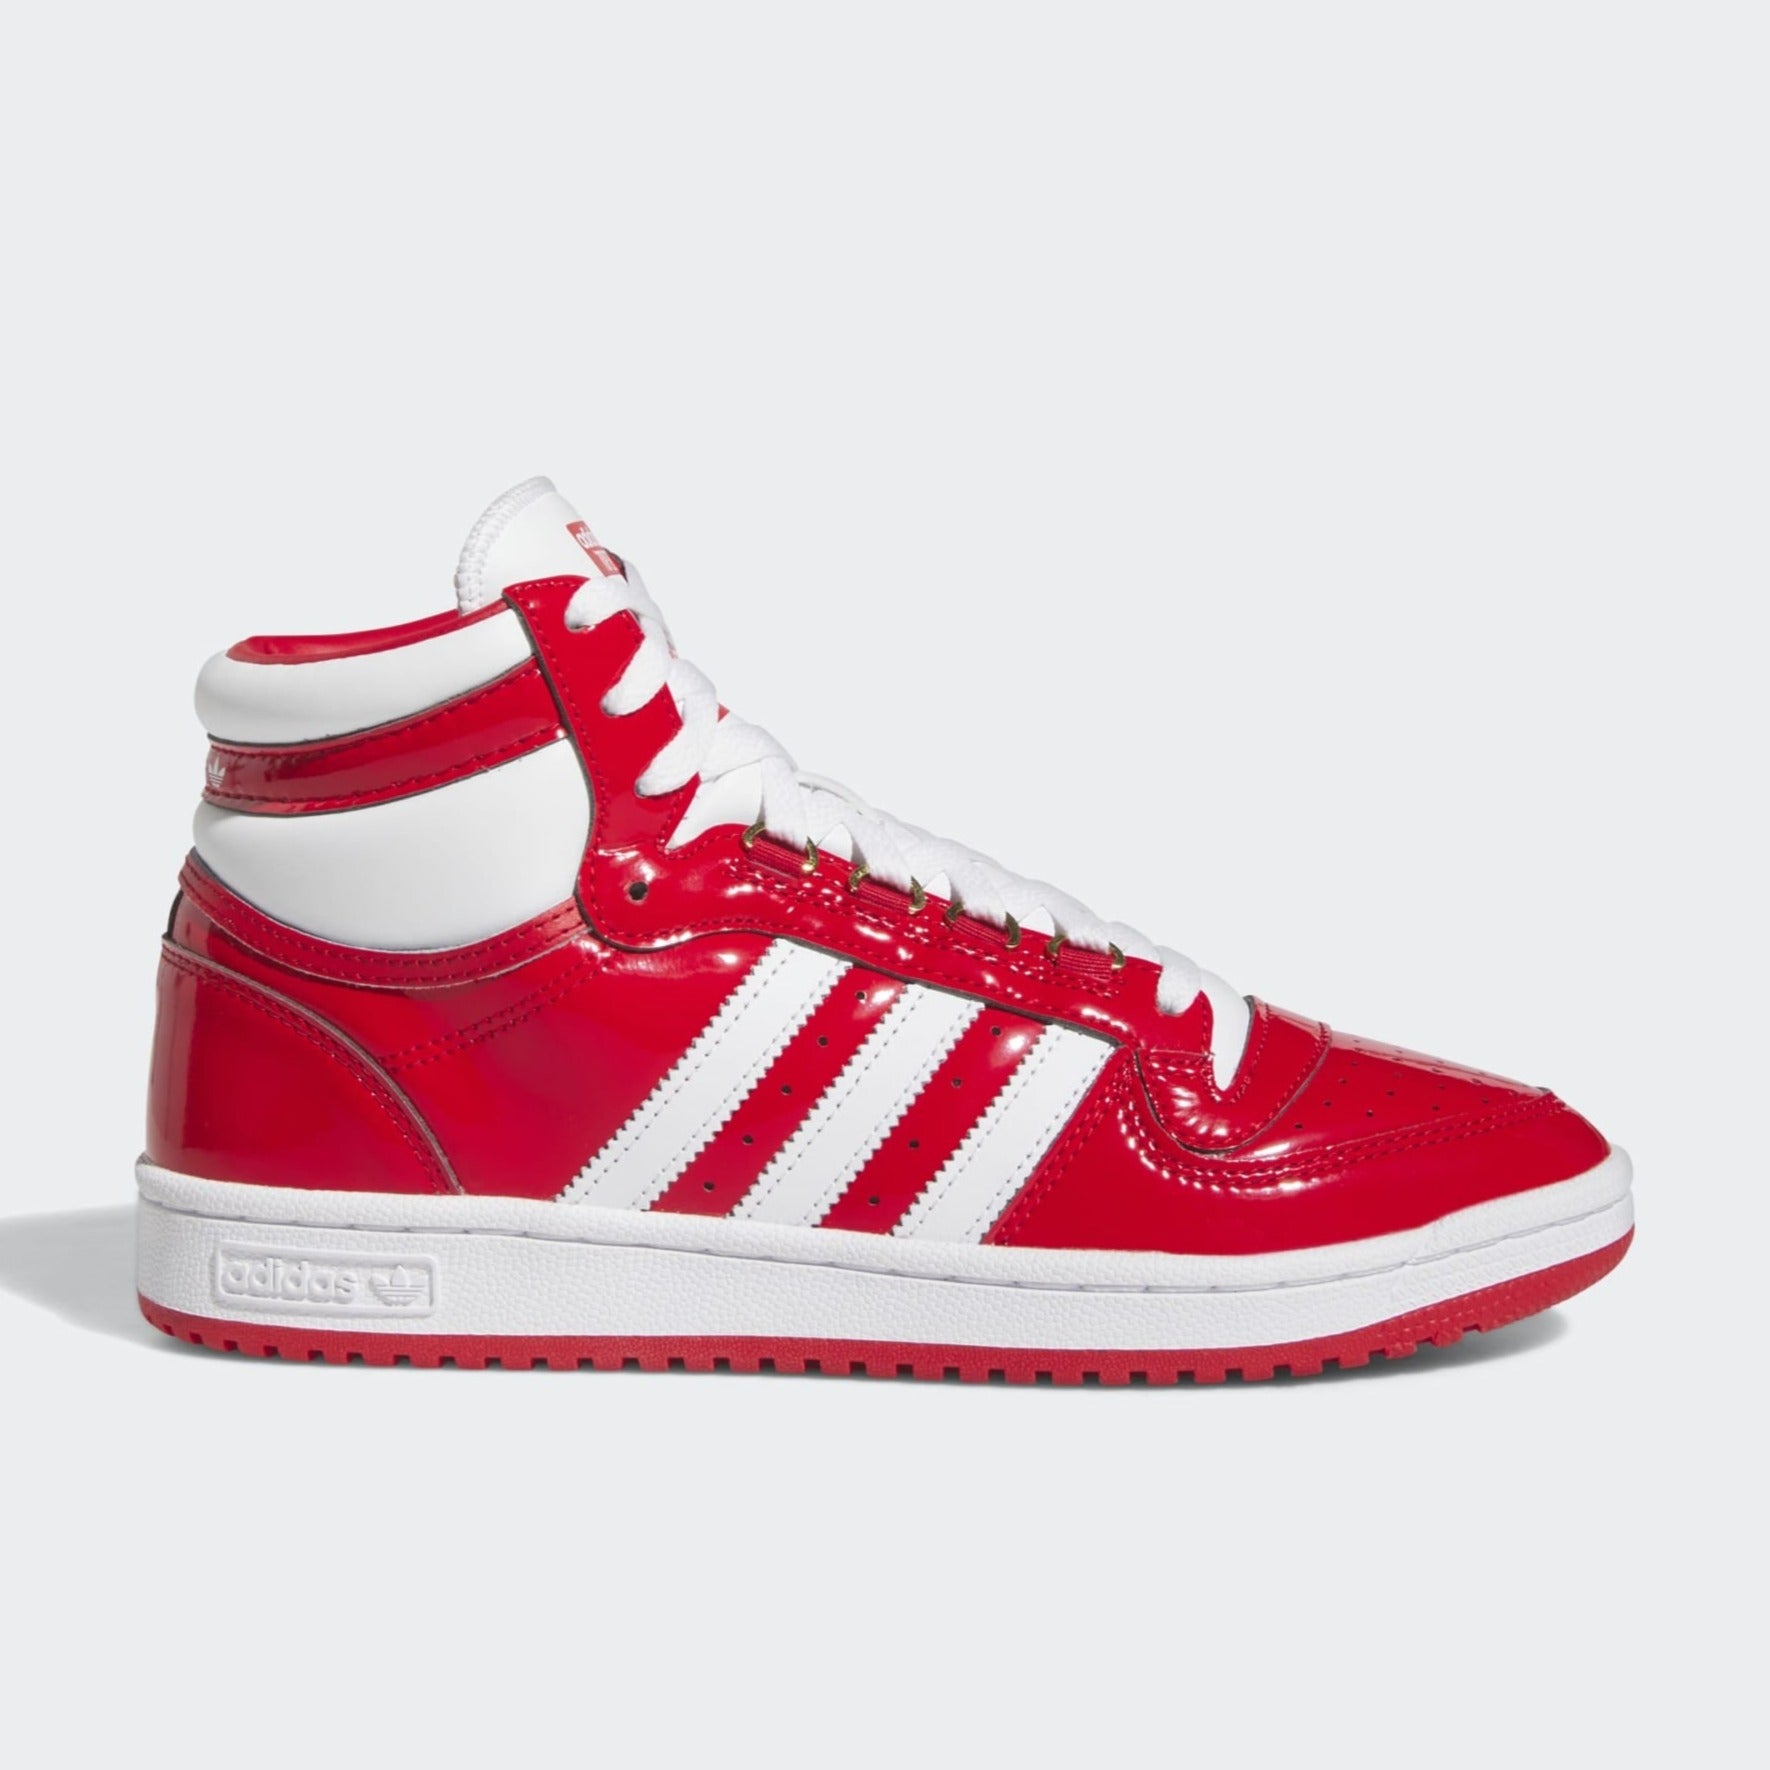 Adidas Top Ten Patent Leather Red White